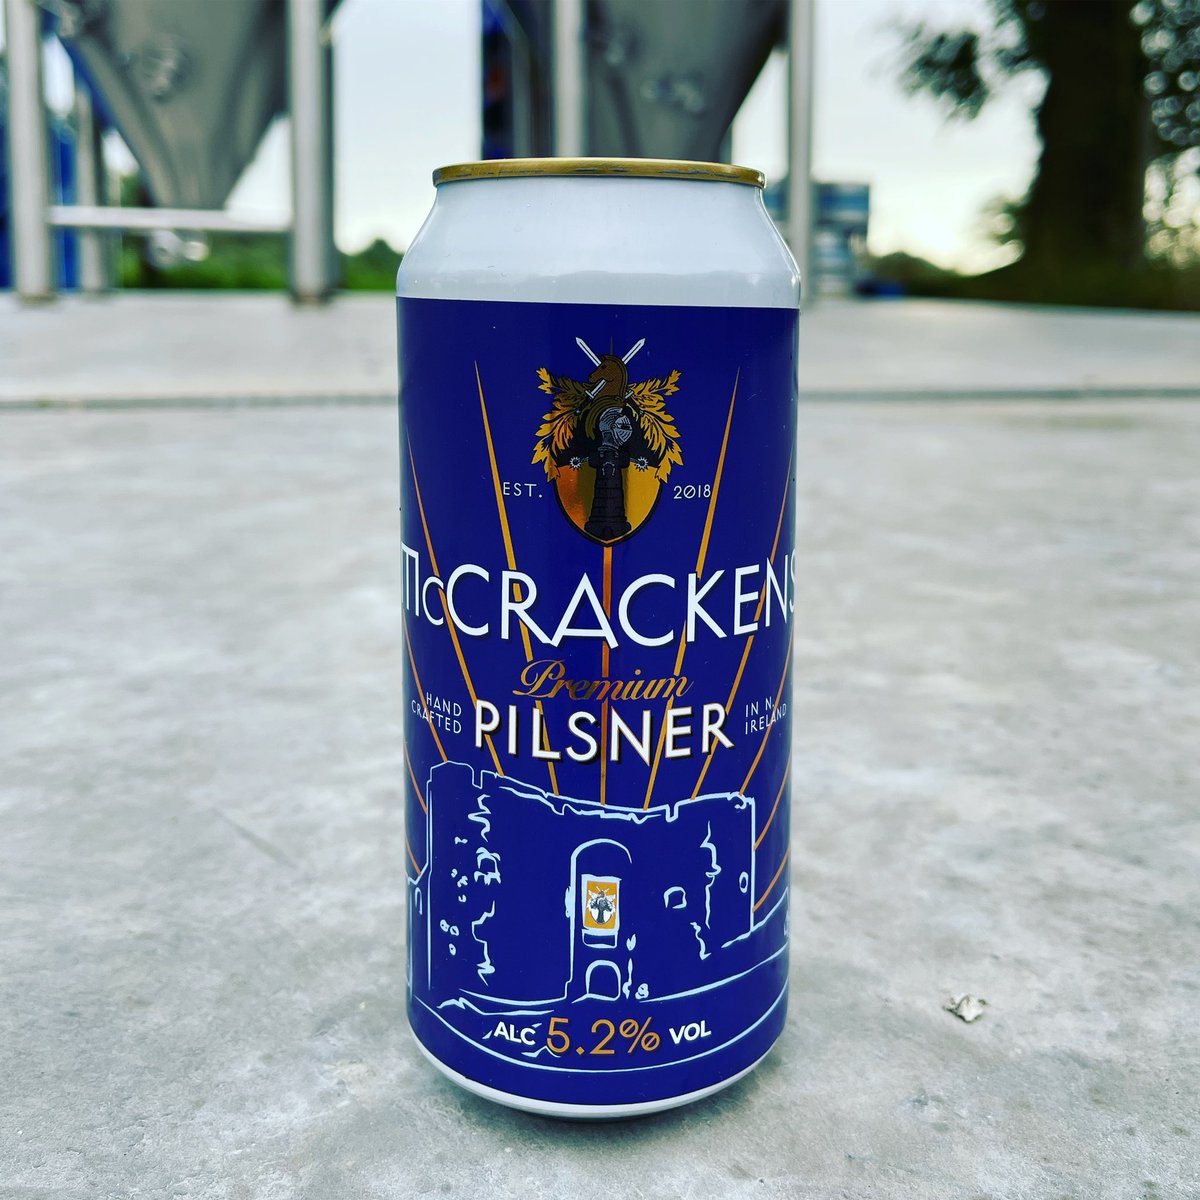 Hot off the production line, our Premium Pilsner is now in can. Available immediately from our online shop and due to hit our usual outlets very soon. 

#mccrackens #newbeeralert #irishcraftbeer #supportlocal #awardwinningbrewery 
 #irishcraftbeer #craftbeer #beer